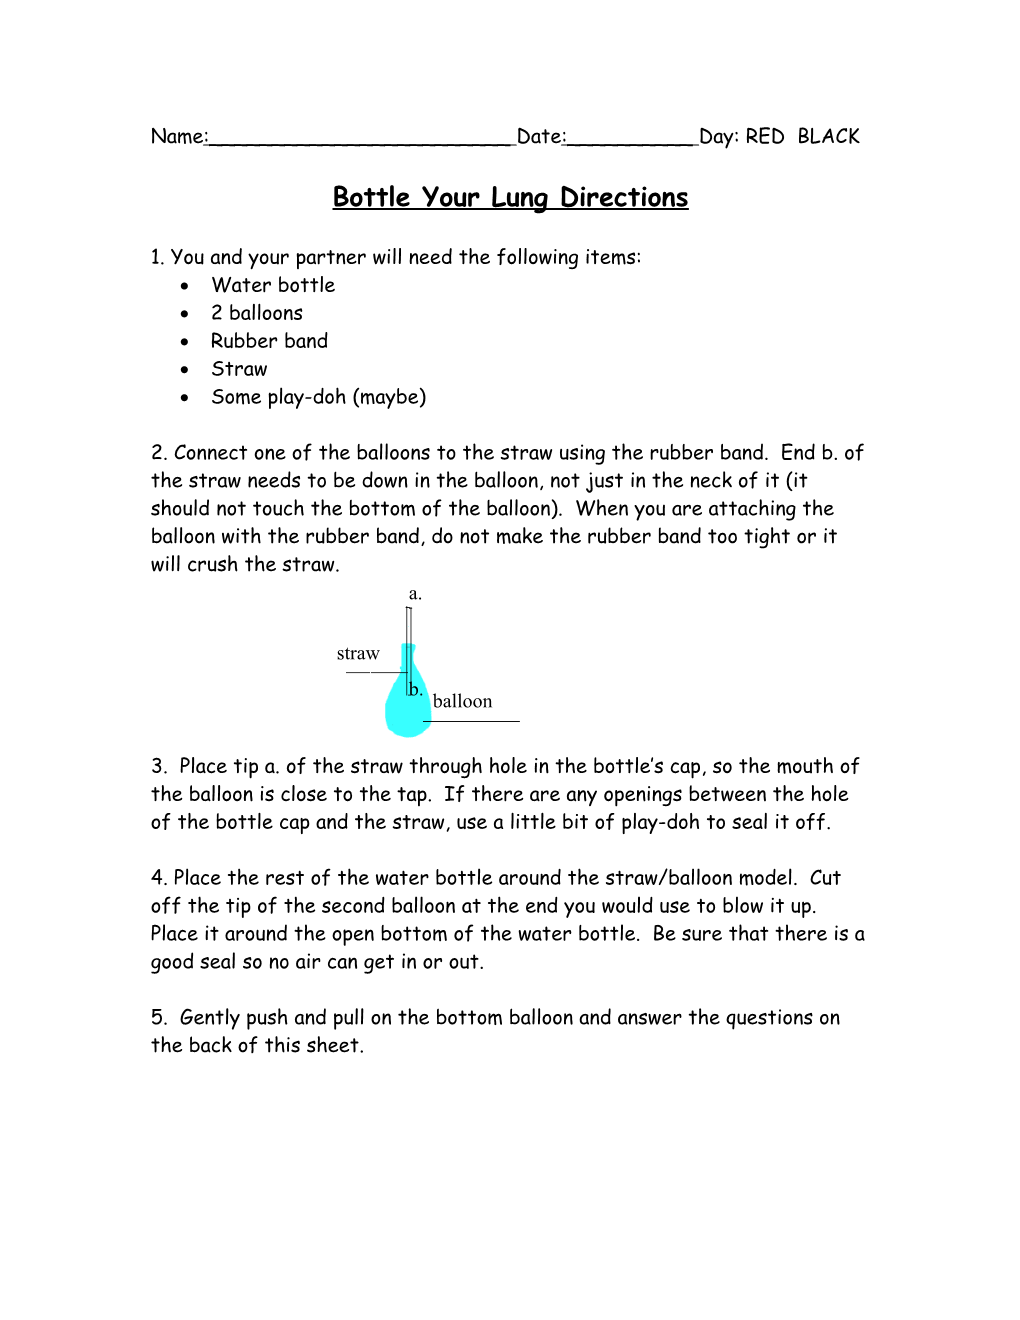 Bottle Your Lung Directions